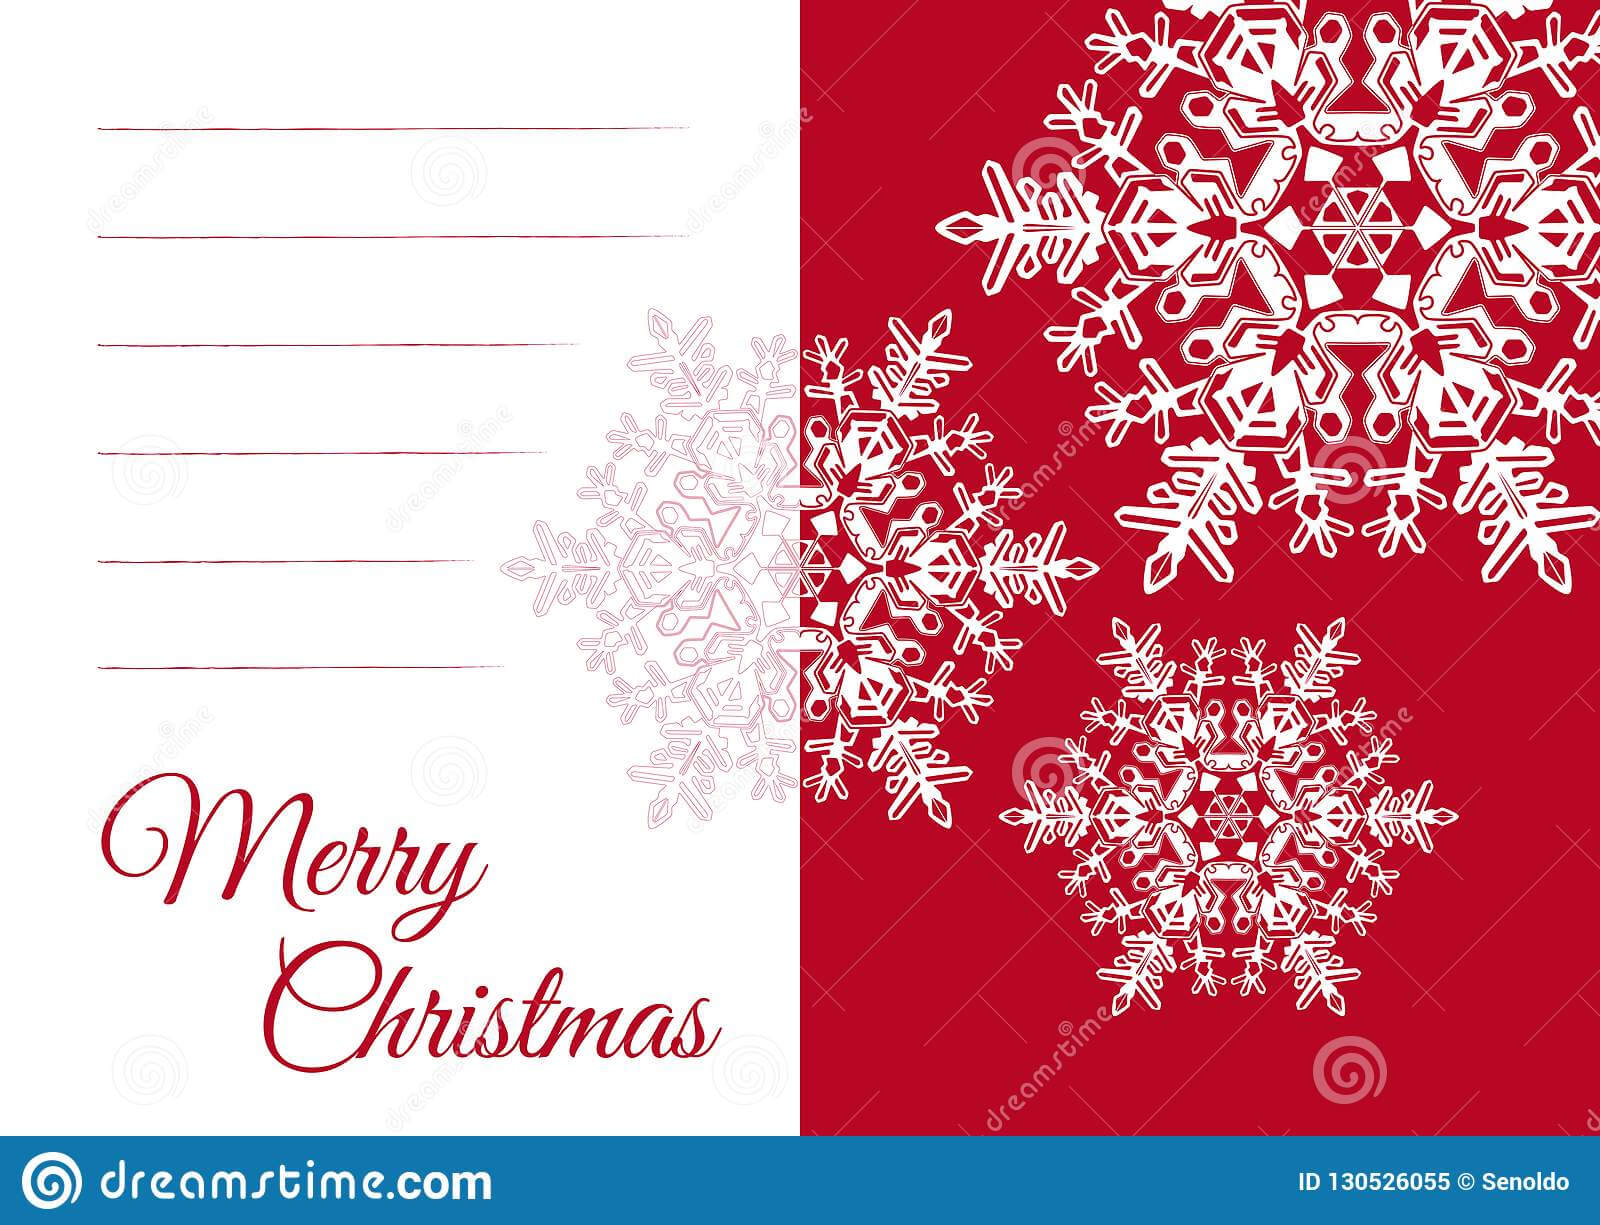 Christmas Greeting Card Template With Blank Text Field Stock With Regard To Blank Christmas Card Templates Free